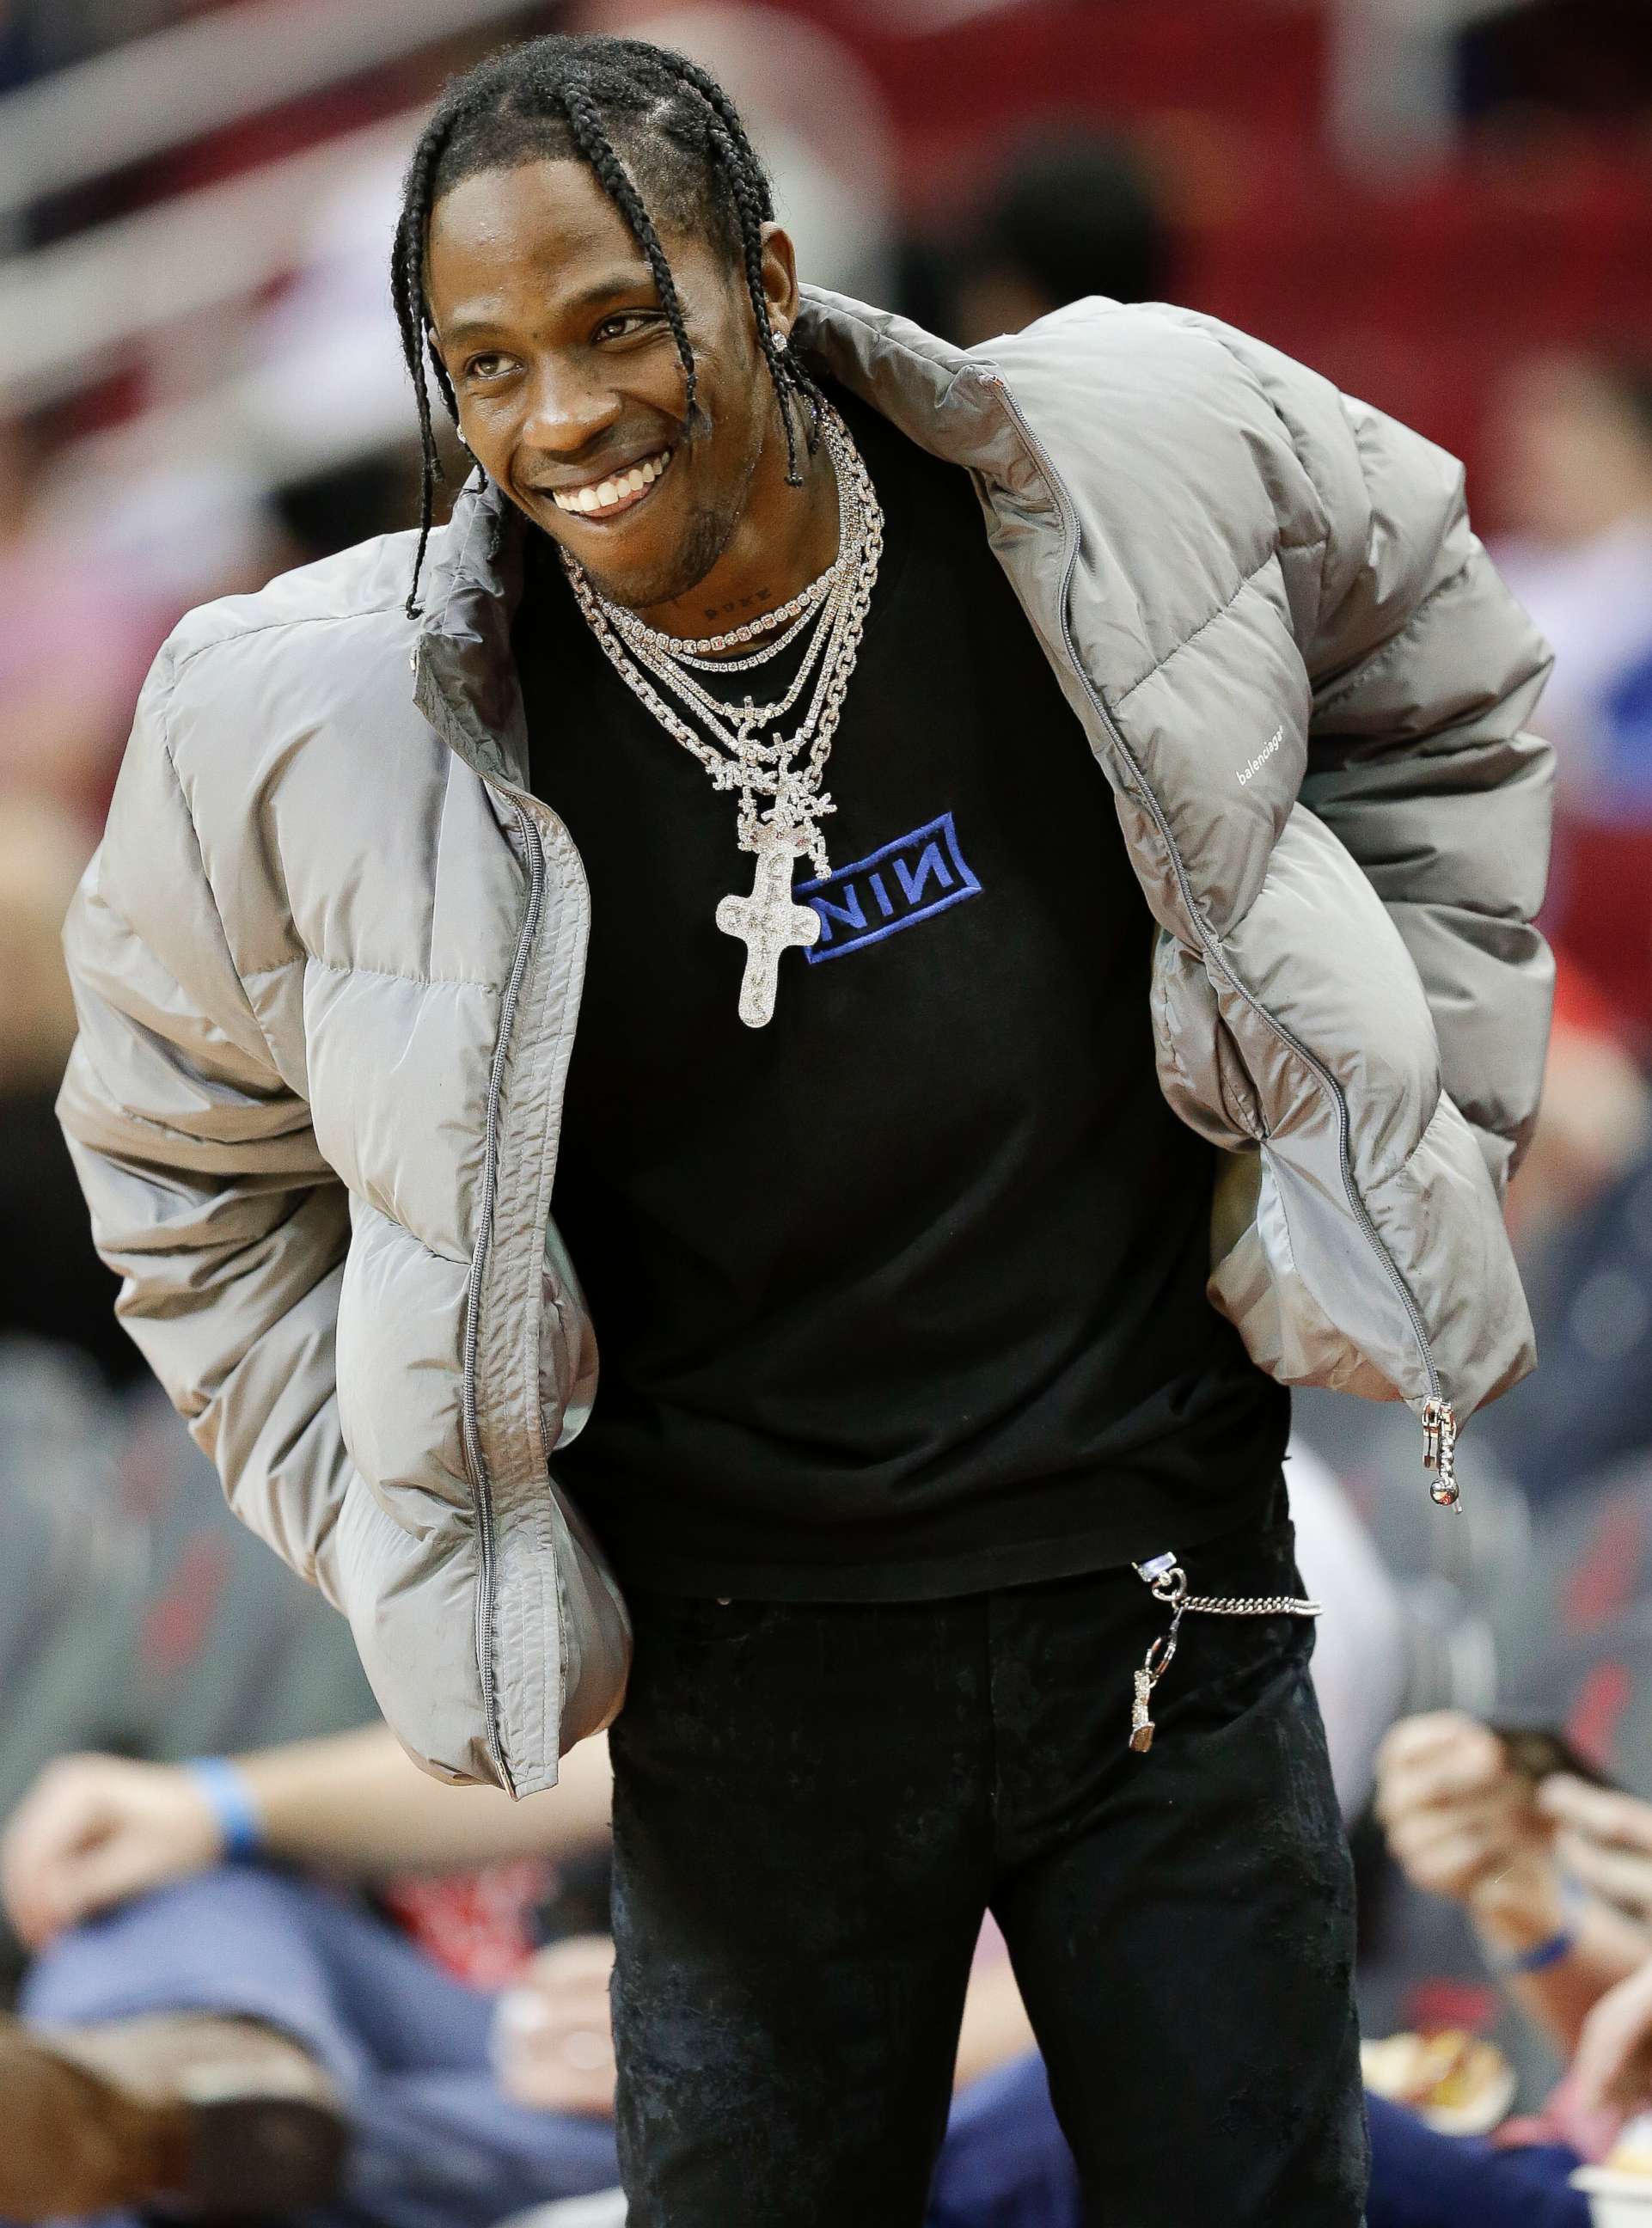 PHOTO: Hip hop artist Travis Scott watches warmups before an NBA basketball game between the Houston Rockets and the Denver Nuggets, in Houston, Feb. 9, 2018.